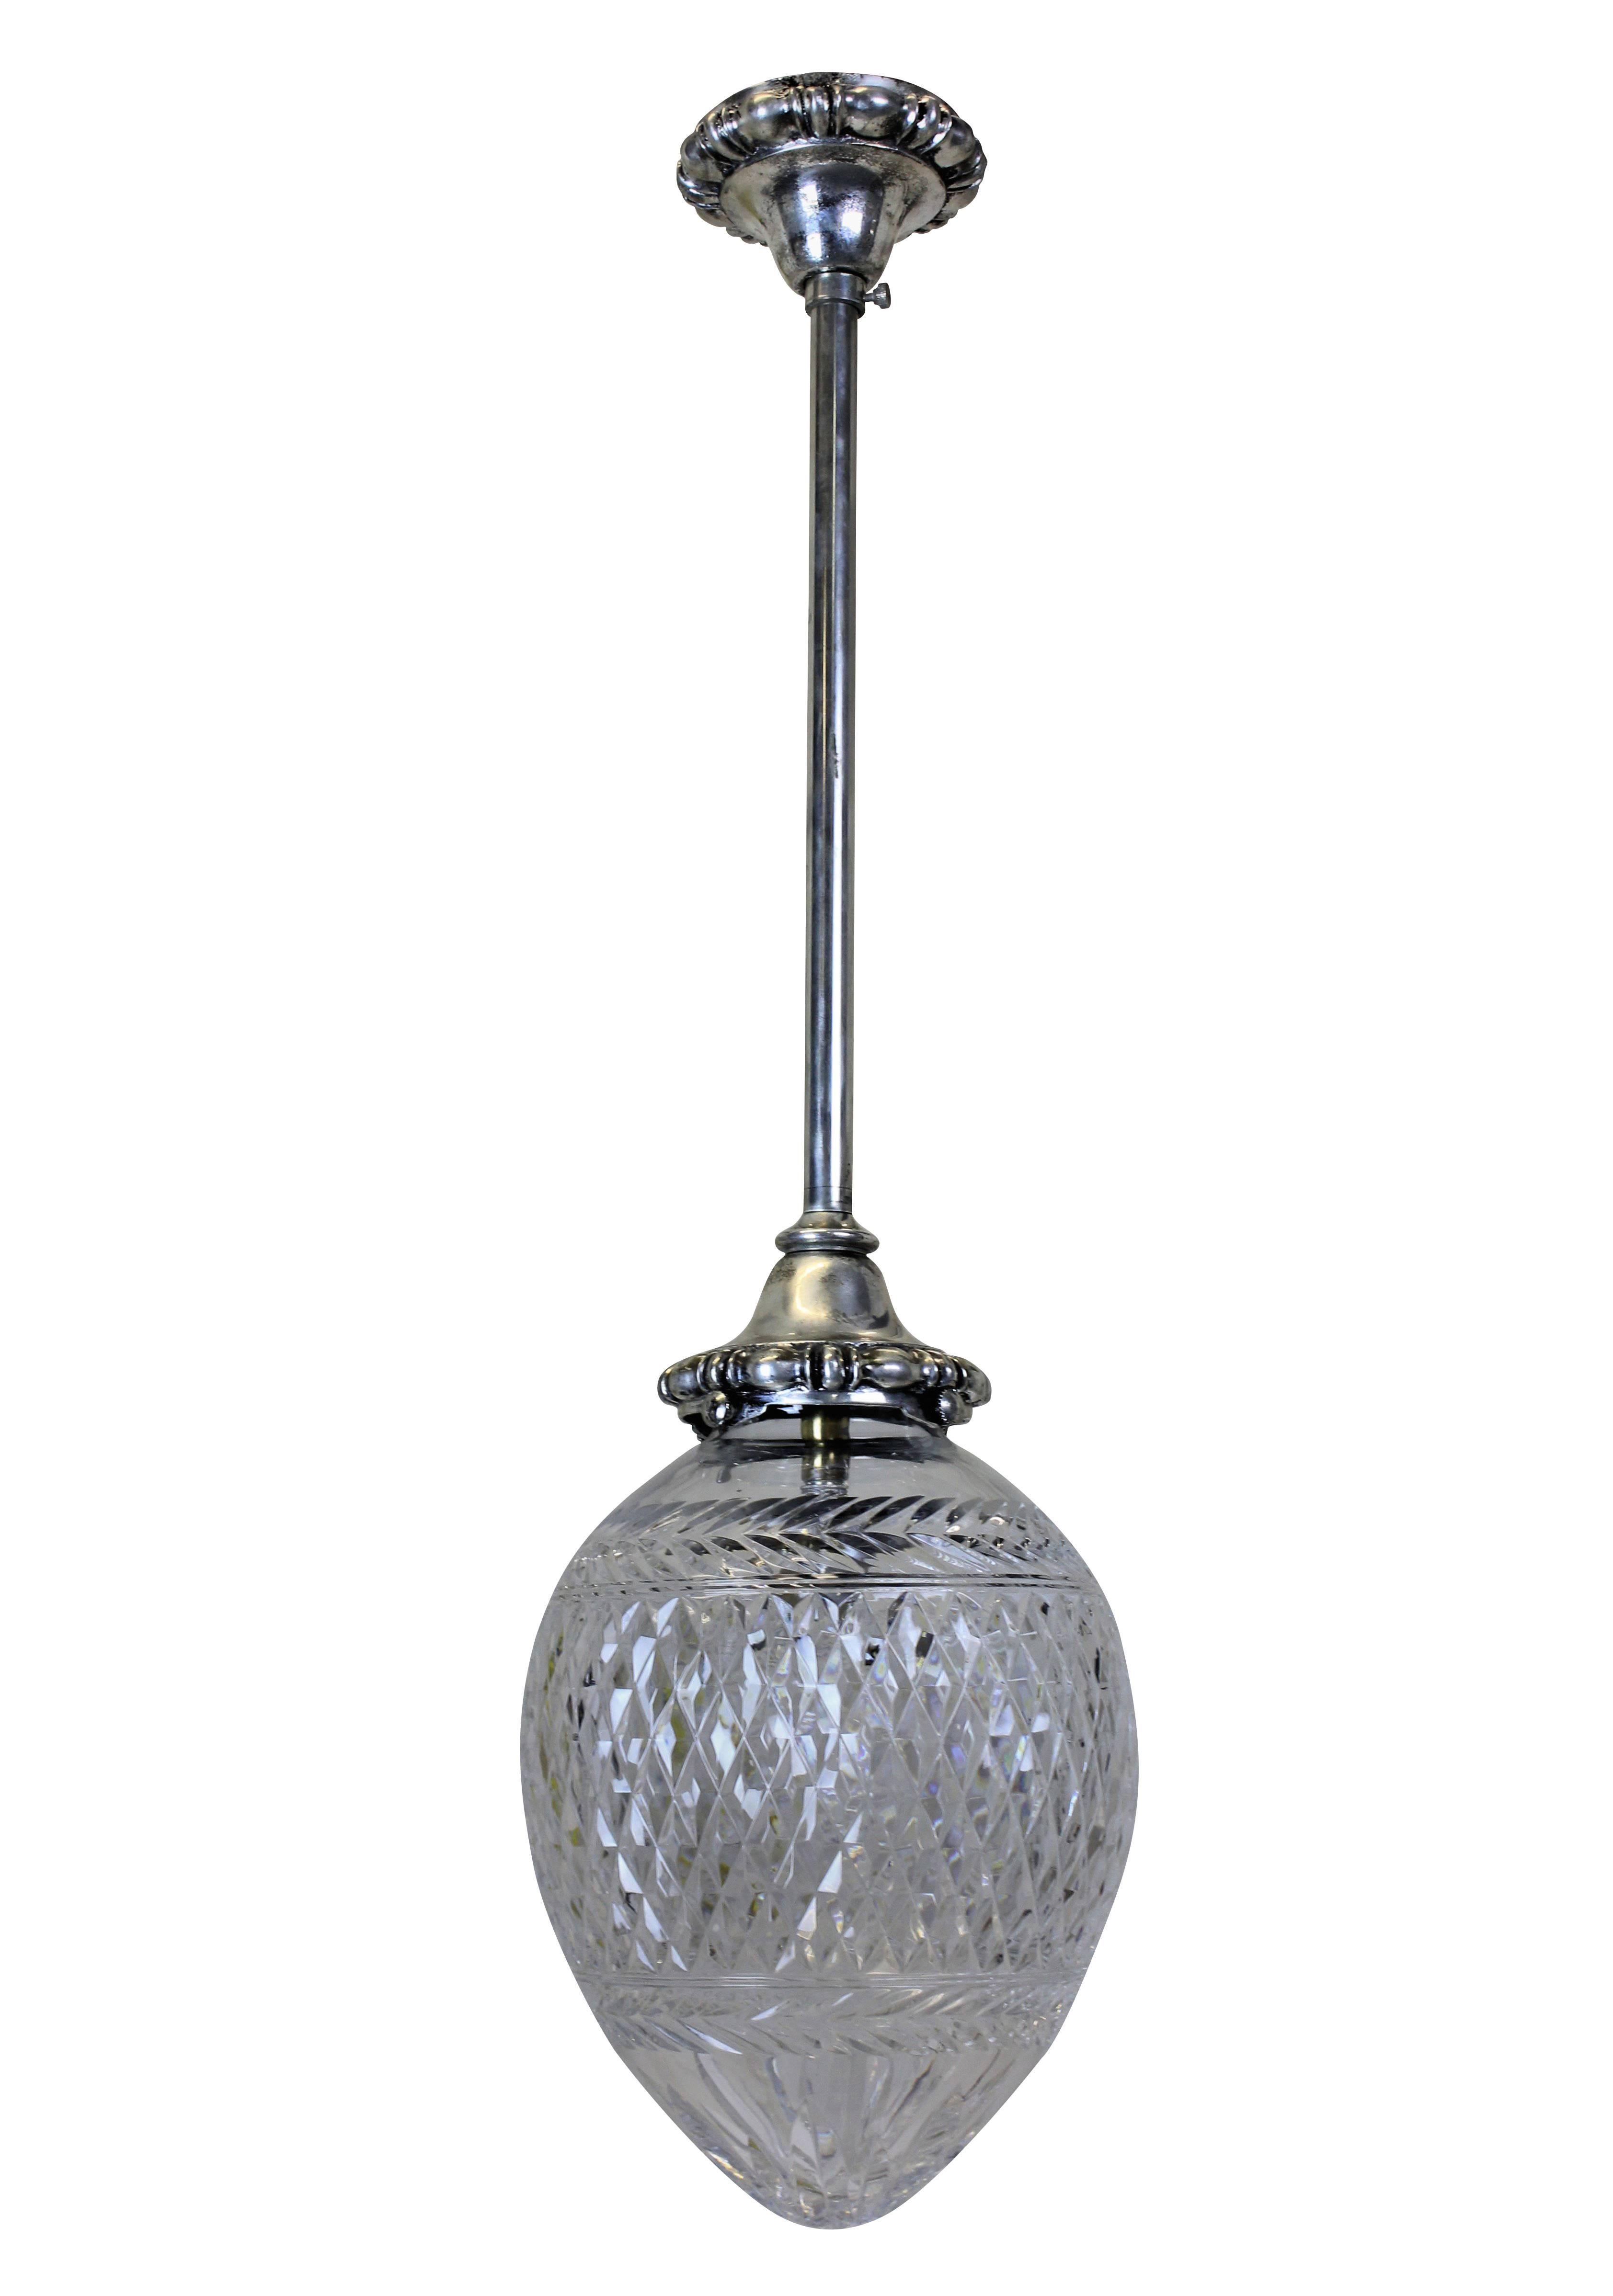 A set of six Edwardian hanging pendant lights in silver plated brass with cut-glass acorn shades.